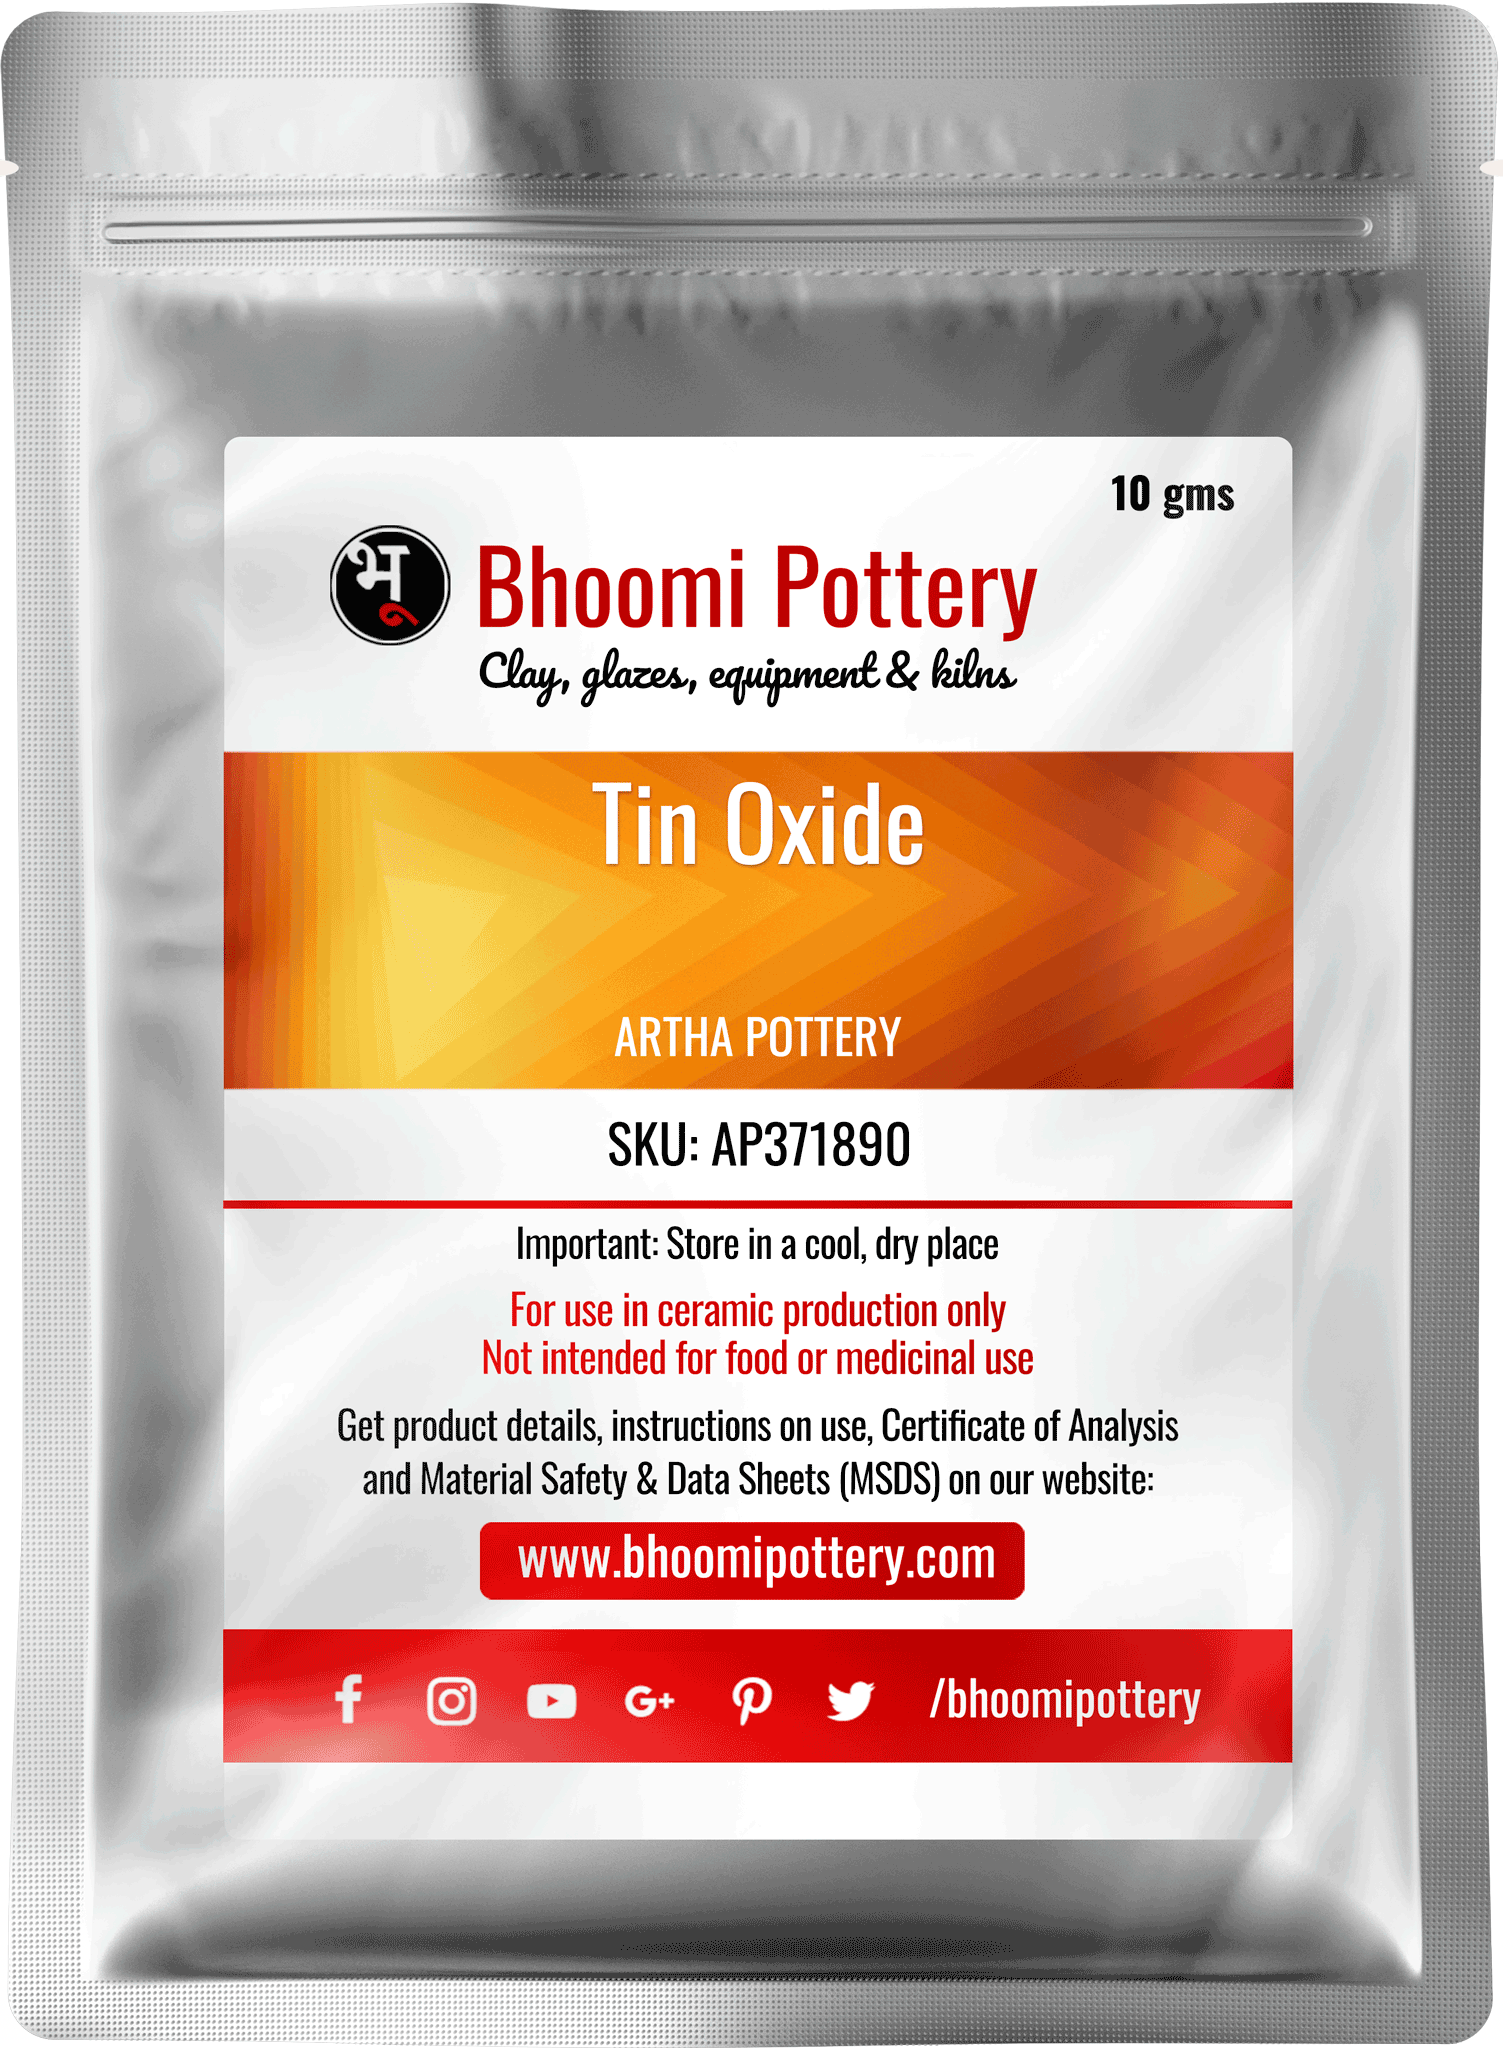 Artha Pottery Tin Oxide 10 gms for sale in India - Bhoomi Pottery